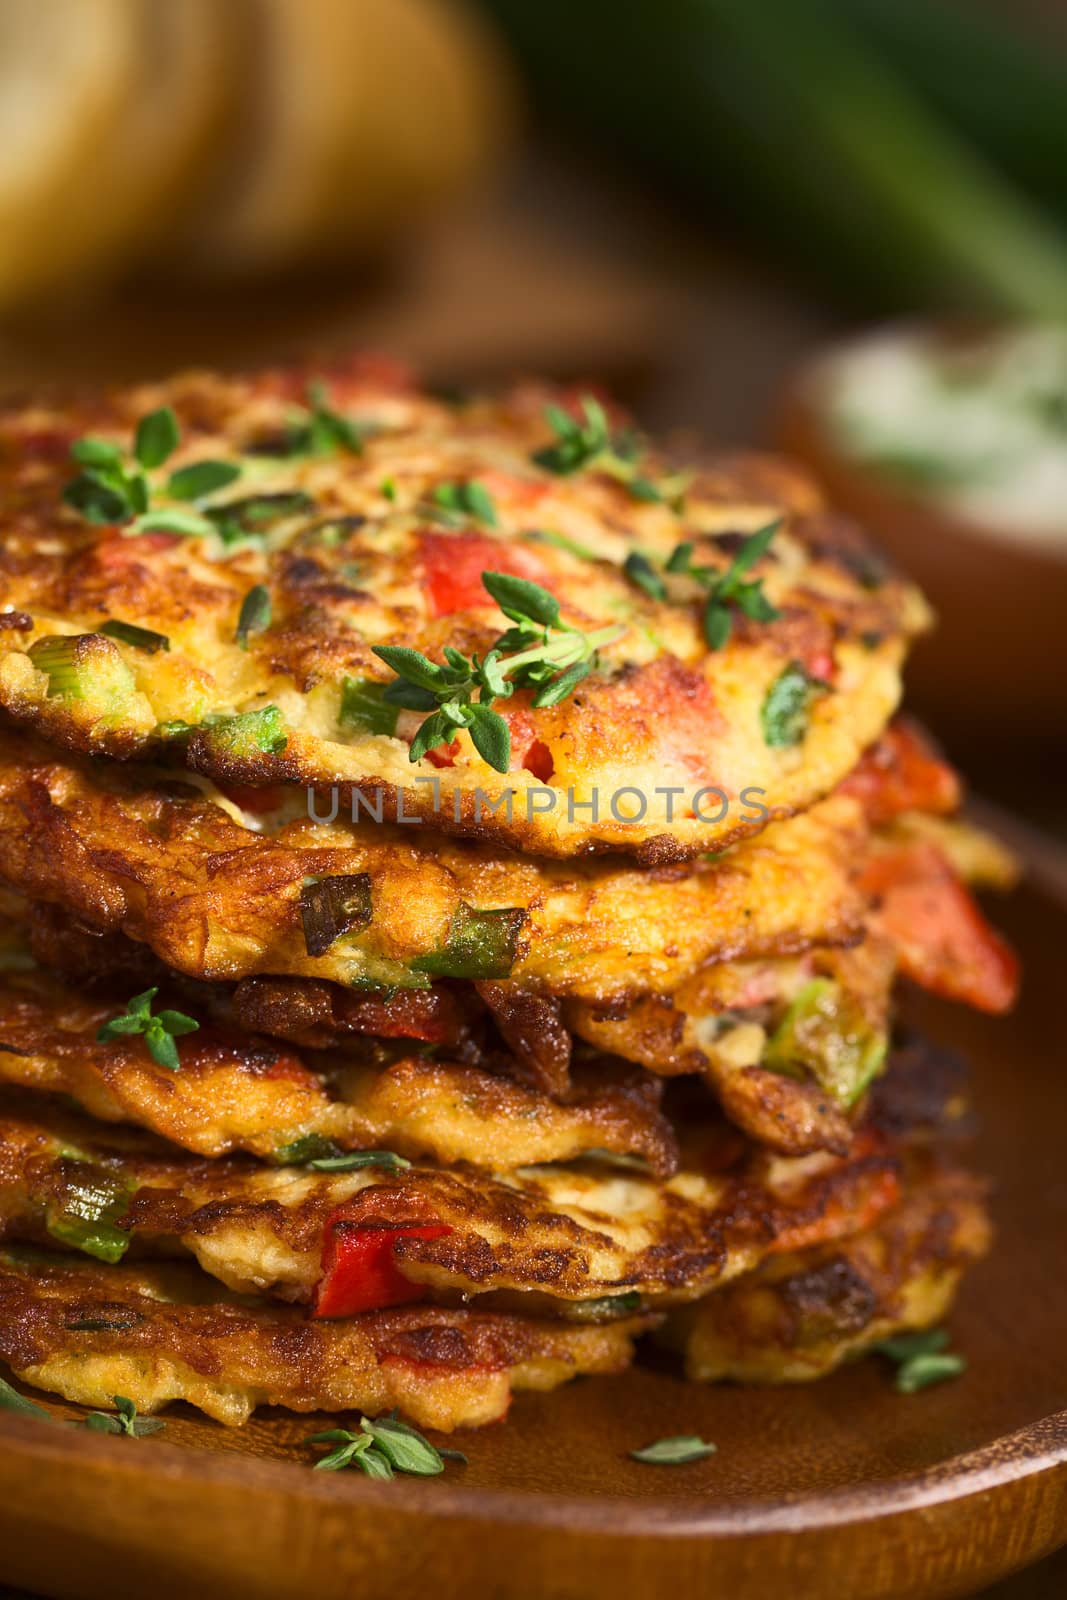 Vegetable and egg fritter made of zucchini, red bell pepper, eggs, green onions and thyme piled on a wooden plate with baguette slices and yogurt dip in the back (Selective Focus, Focus on the front of the thyme sprig on the top of the fritters and on the front of the top fritters) 